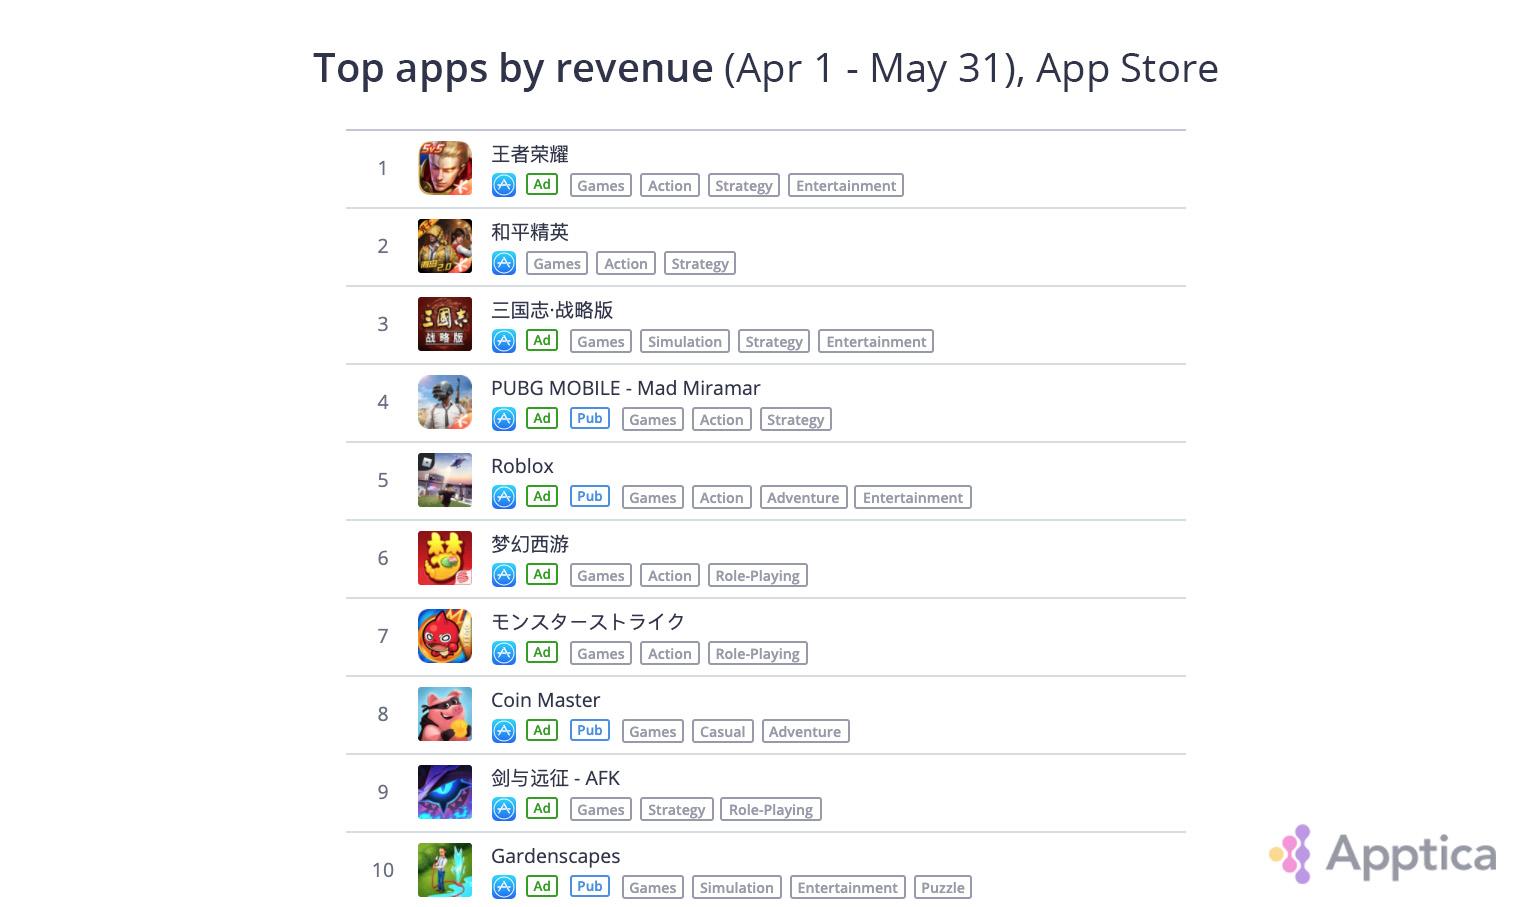 Apptica Chinese Mobile Games Top Highest Grossing List Amid Covid